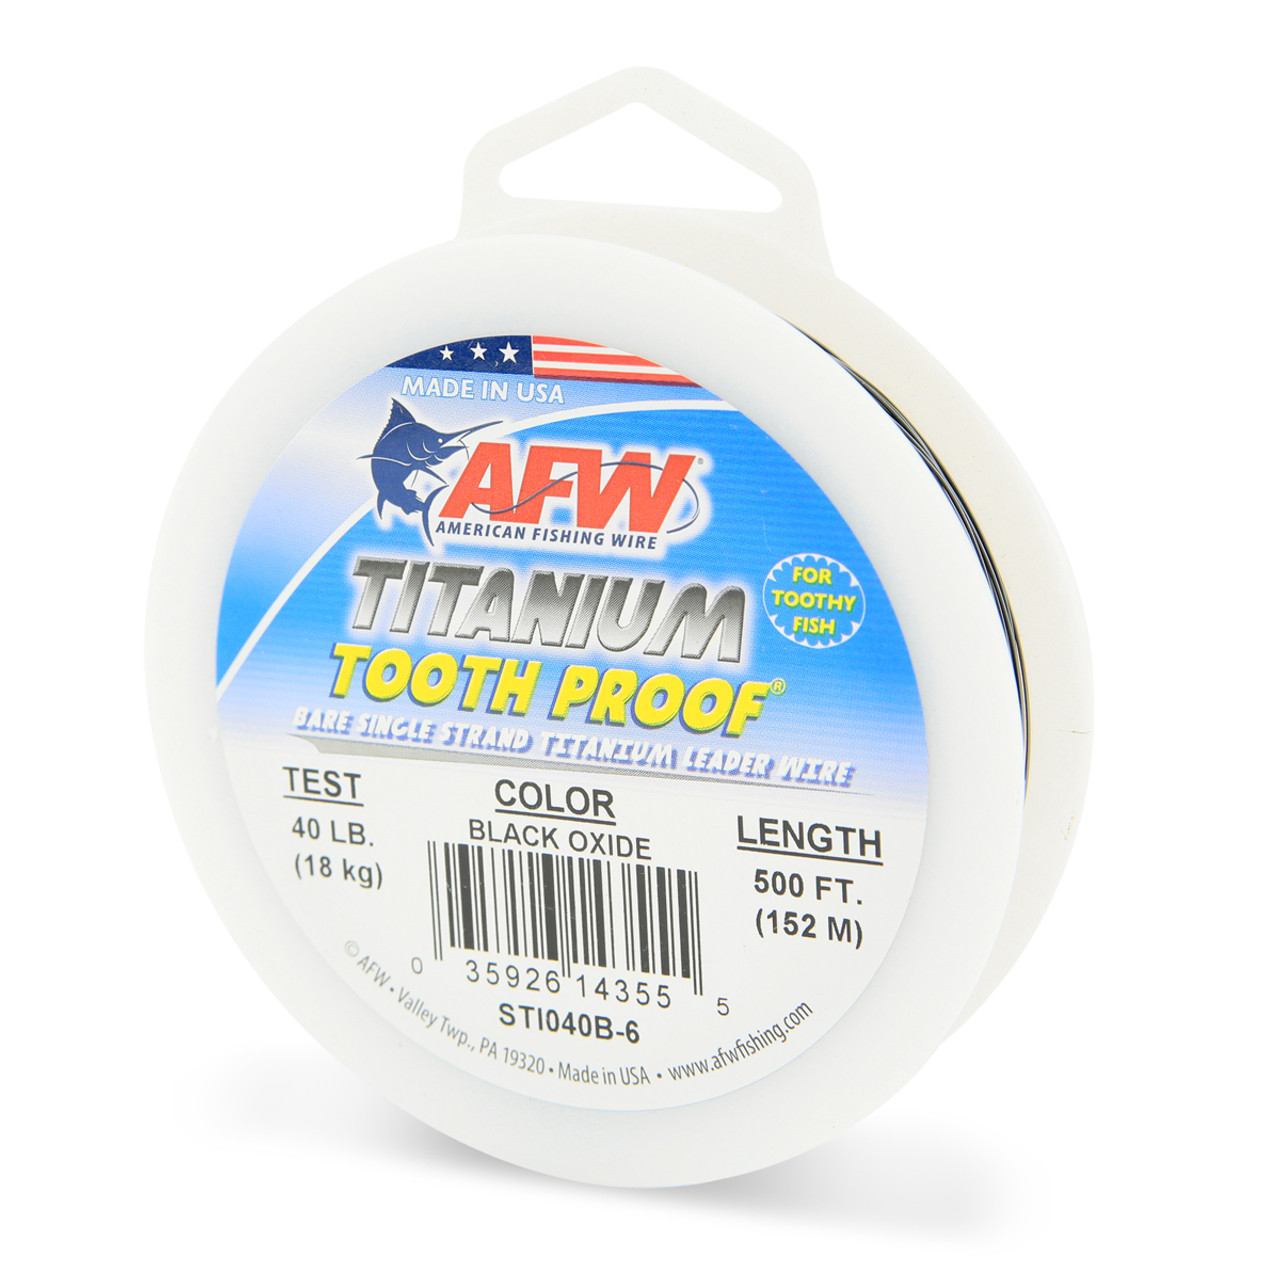 AFW - Titanium Tooth Proof Single Strand Leader Wire - Black Oxide